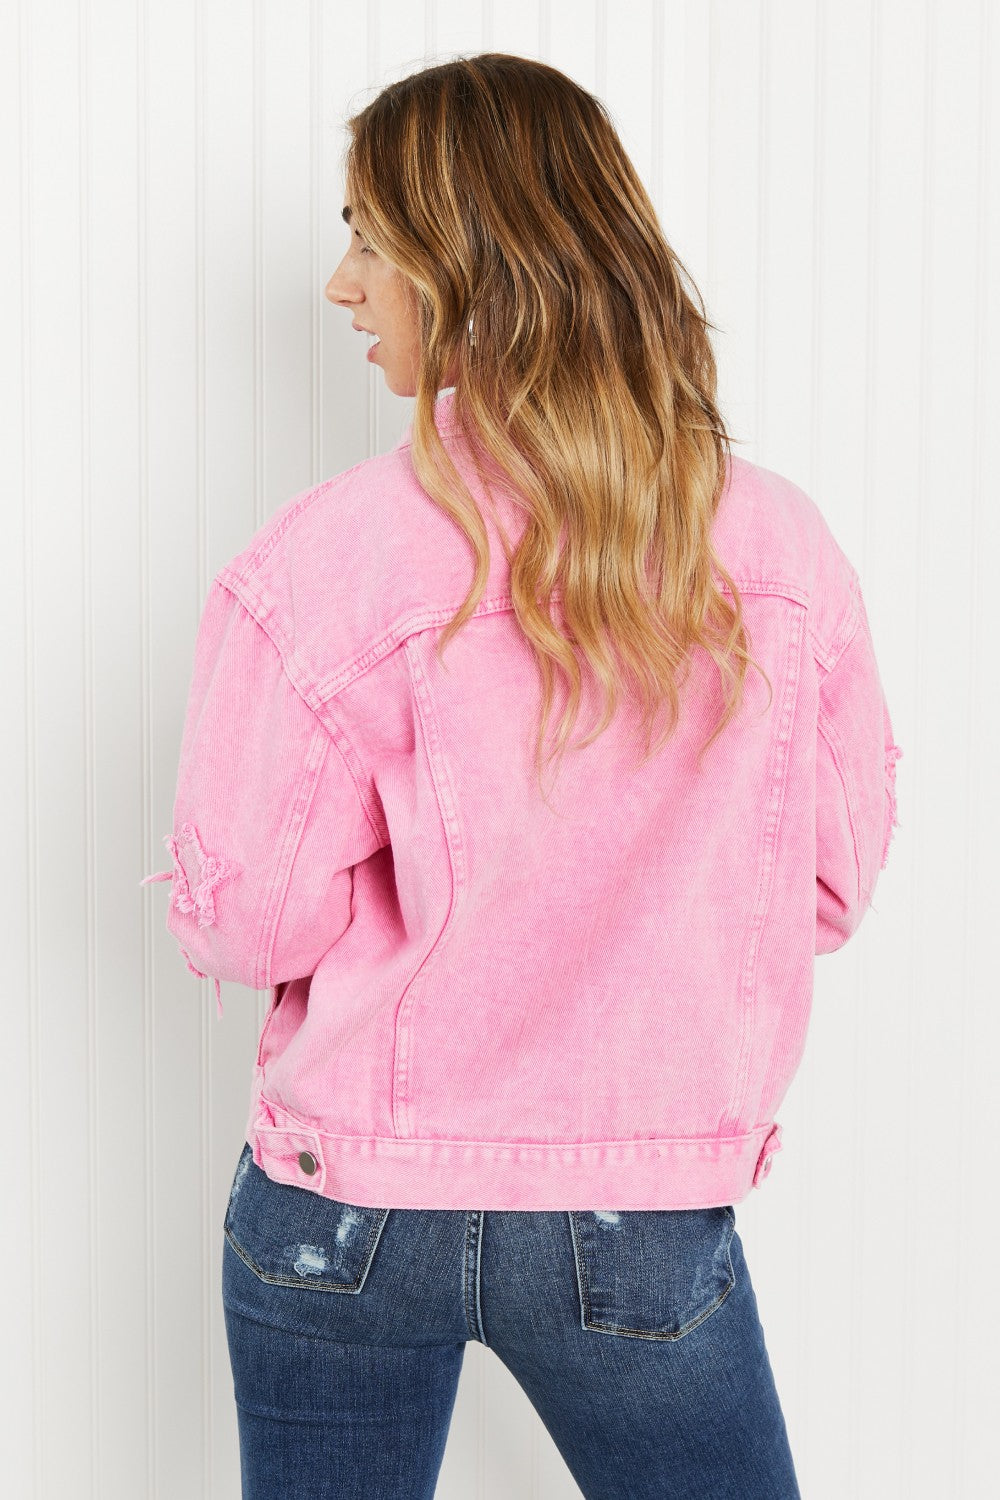 Andree by Unit Starstruck Sequin Star Patch Denim Jacket